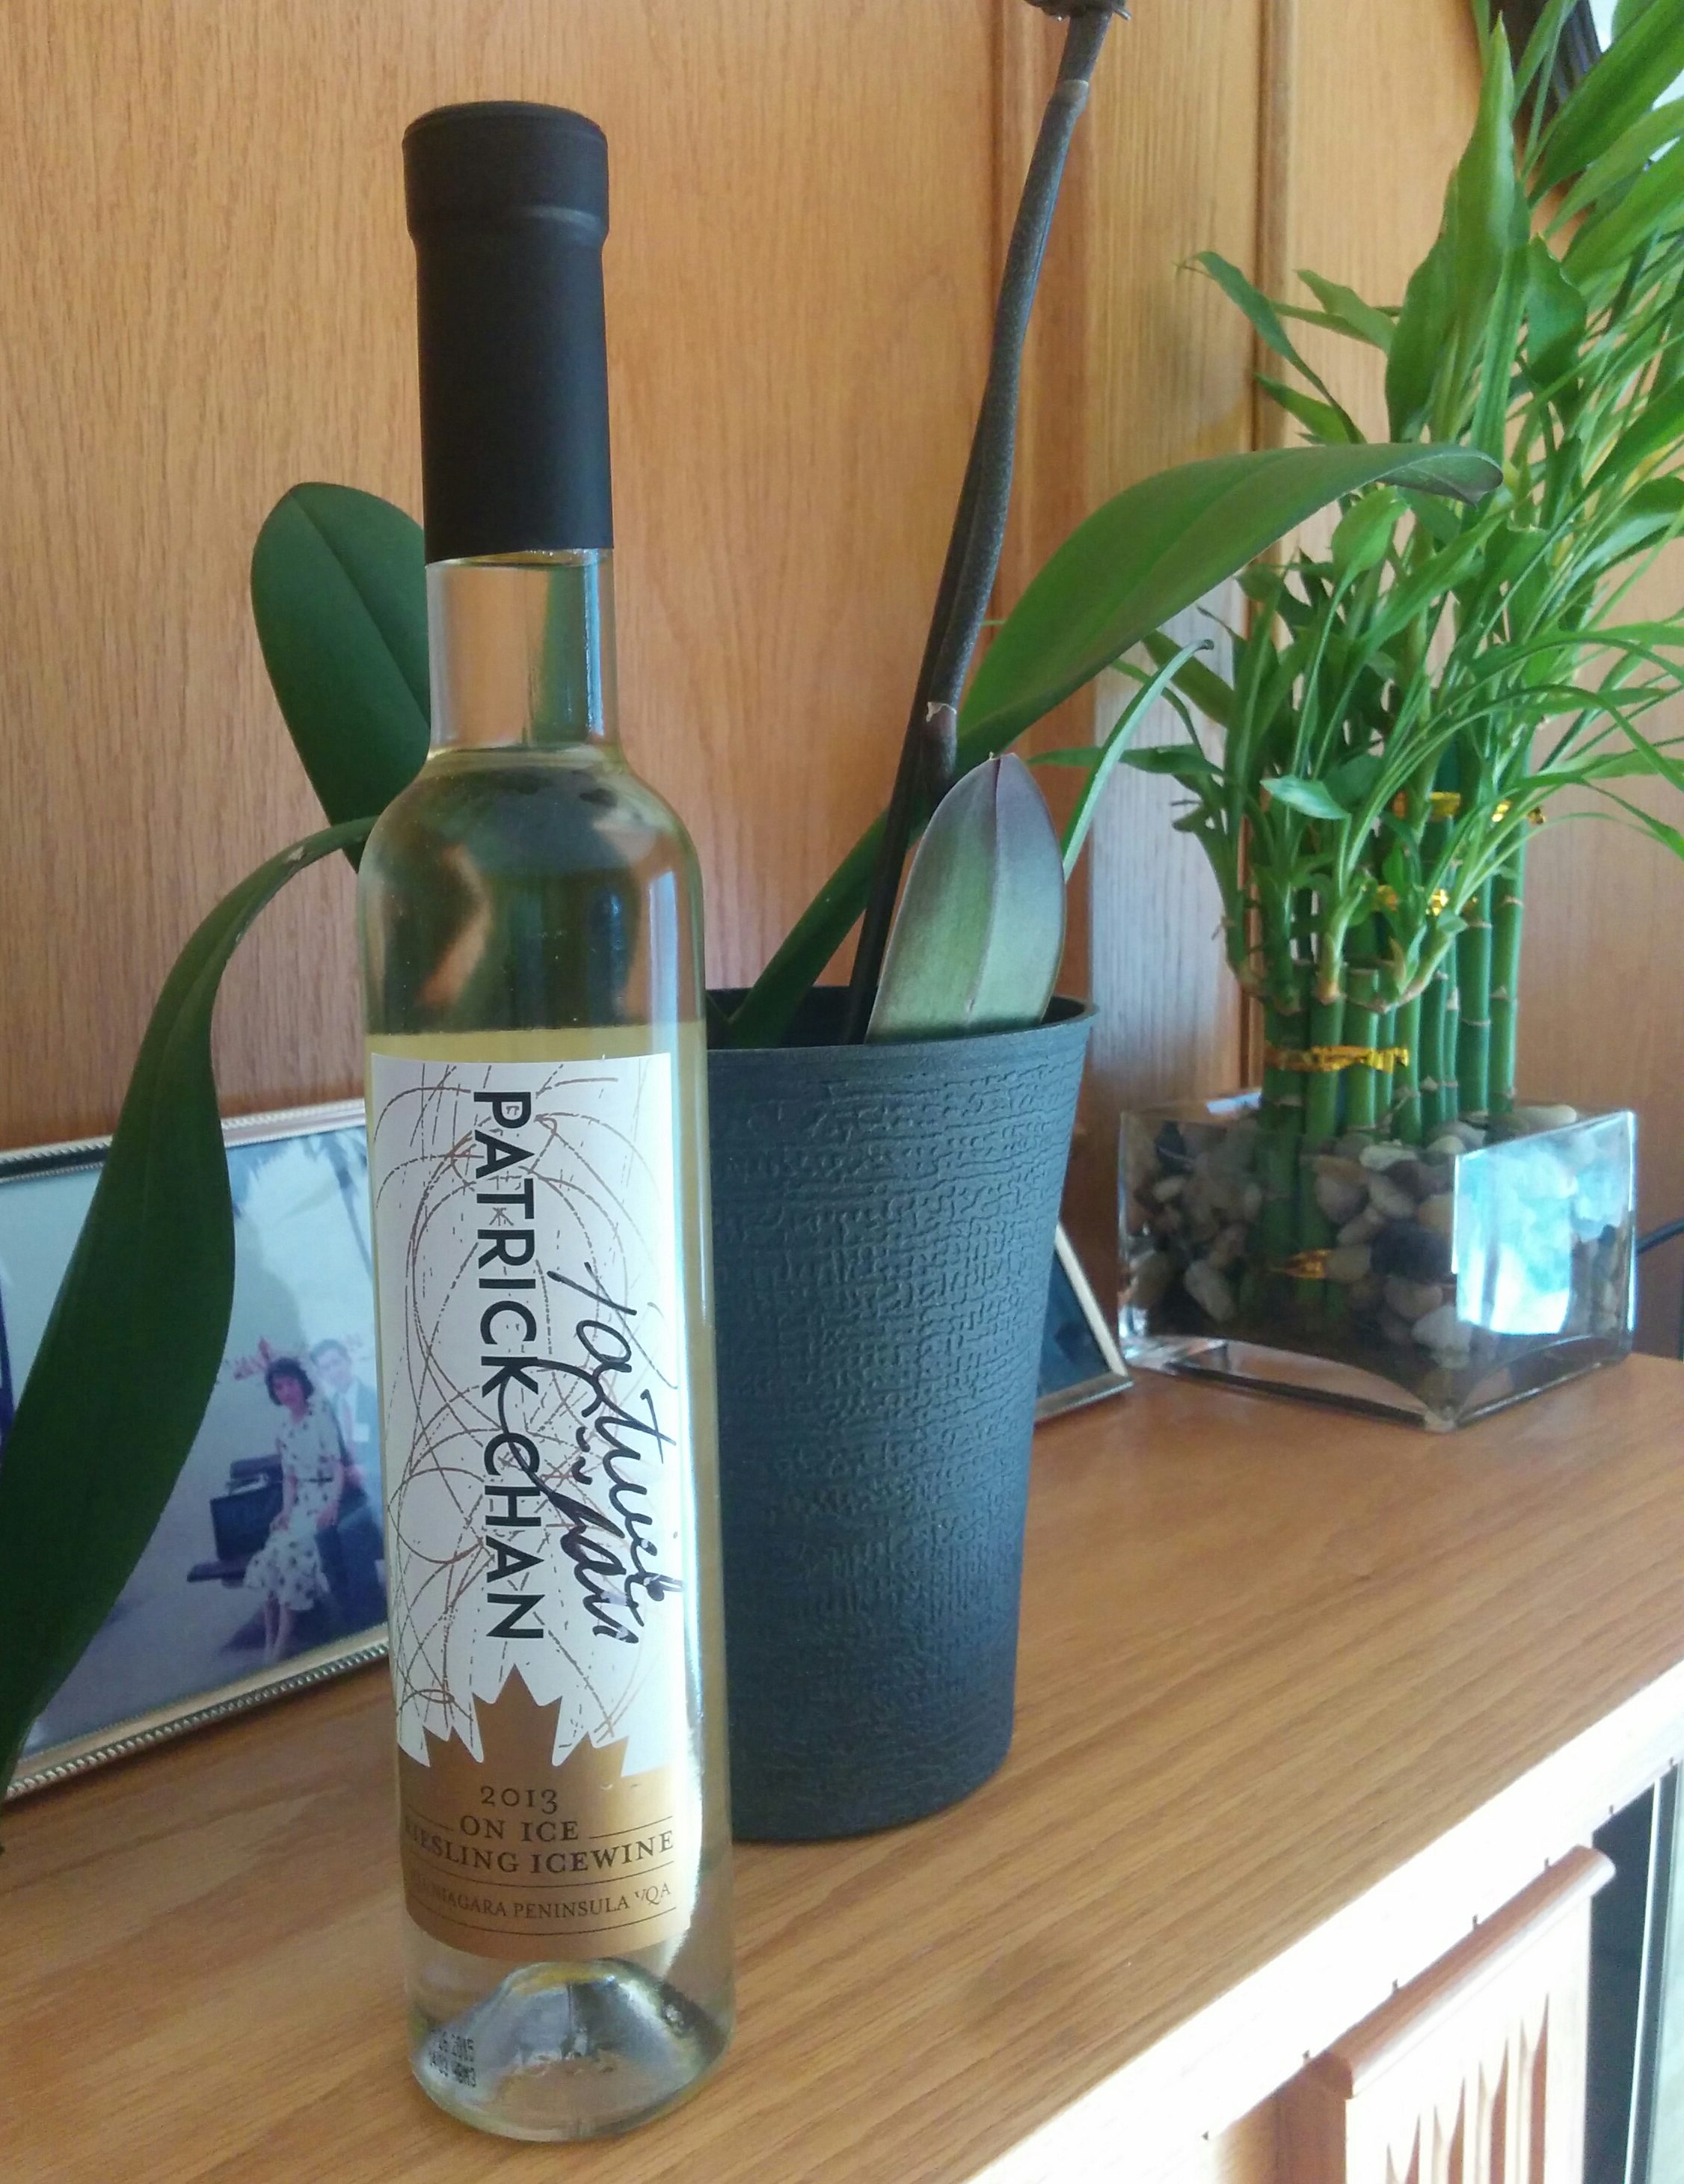 A signed bottle of Patrick Chan's "On Ice" Icewine. (©Krunchii. Used with permission.)